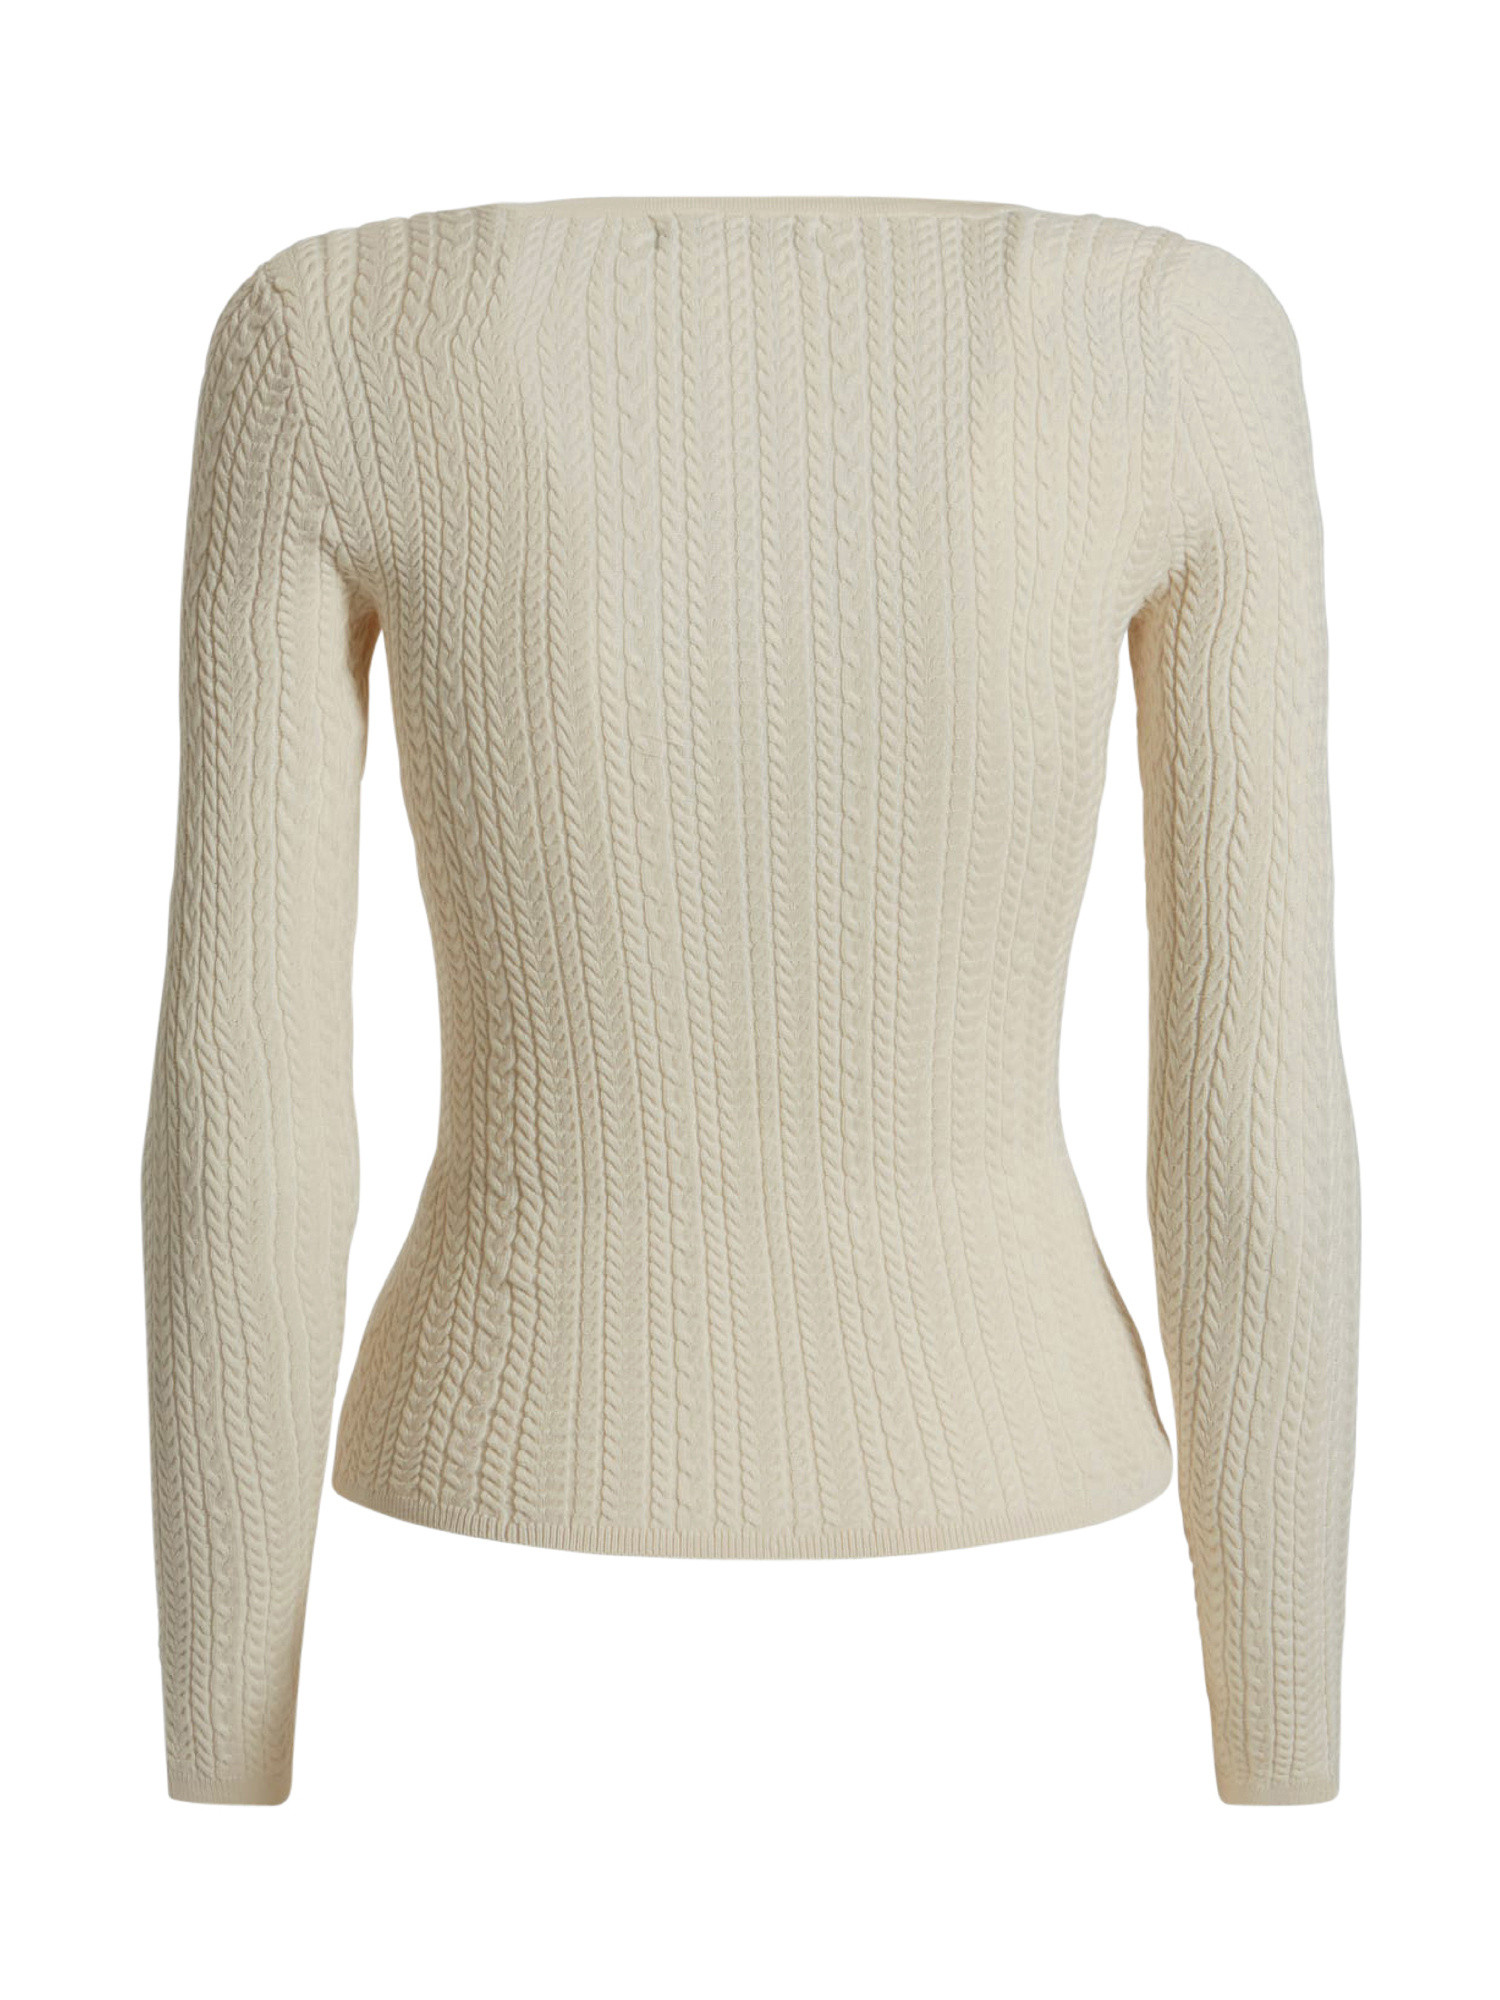 Long sleeves sweater, Cream, large image number 1